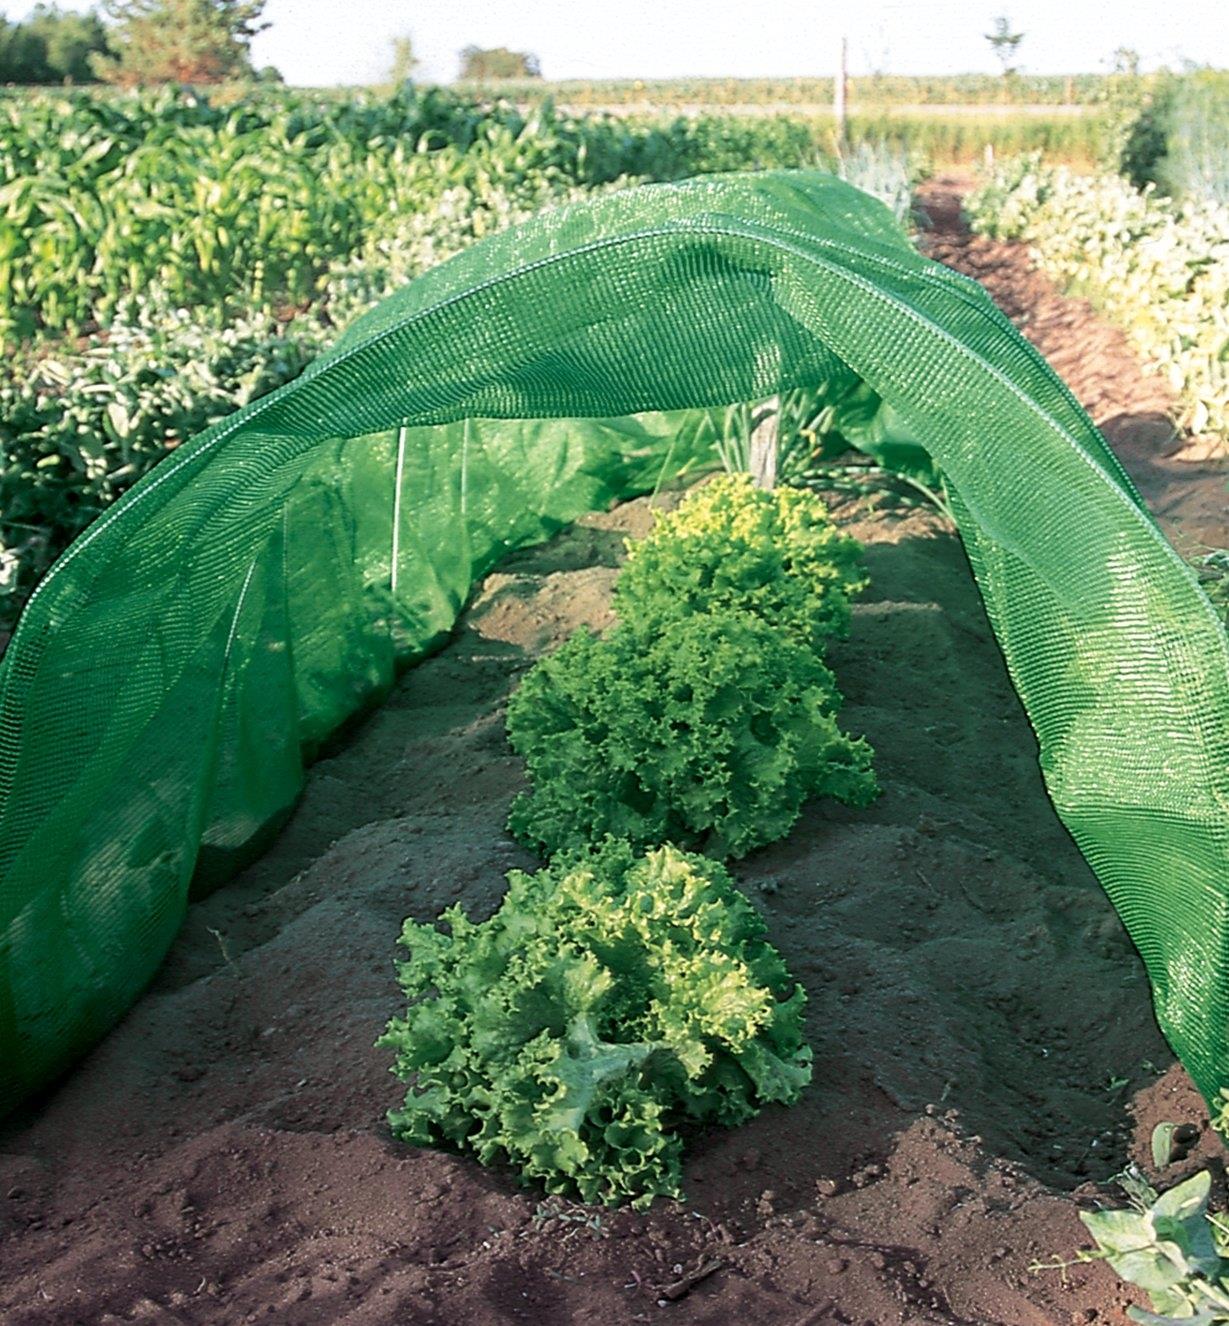 Shade cloth held on hoops covers a row of lettuce in a garden